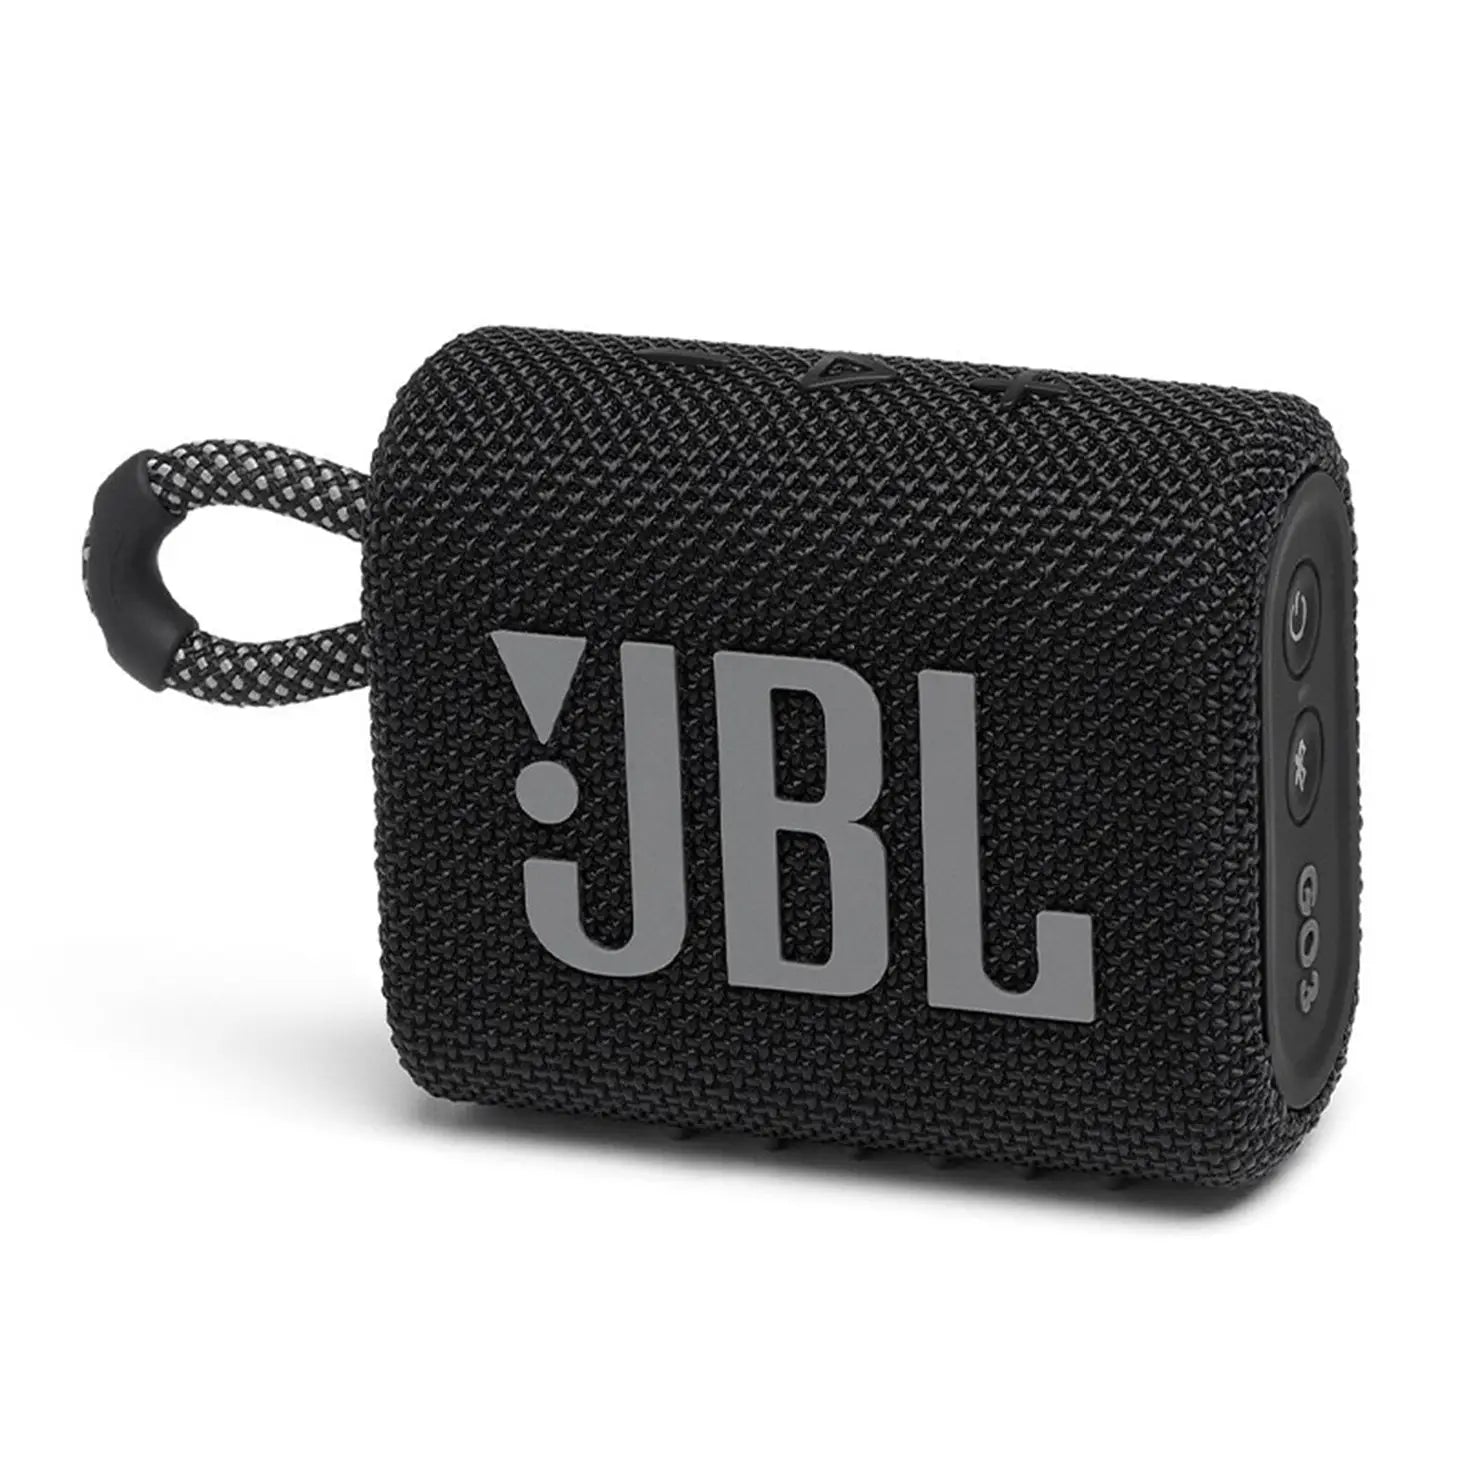 SALE／59%OFF】 JBL GO3 RED